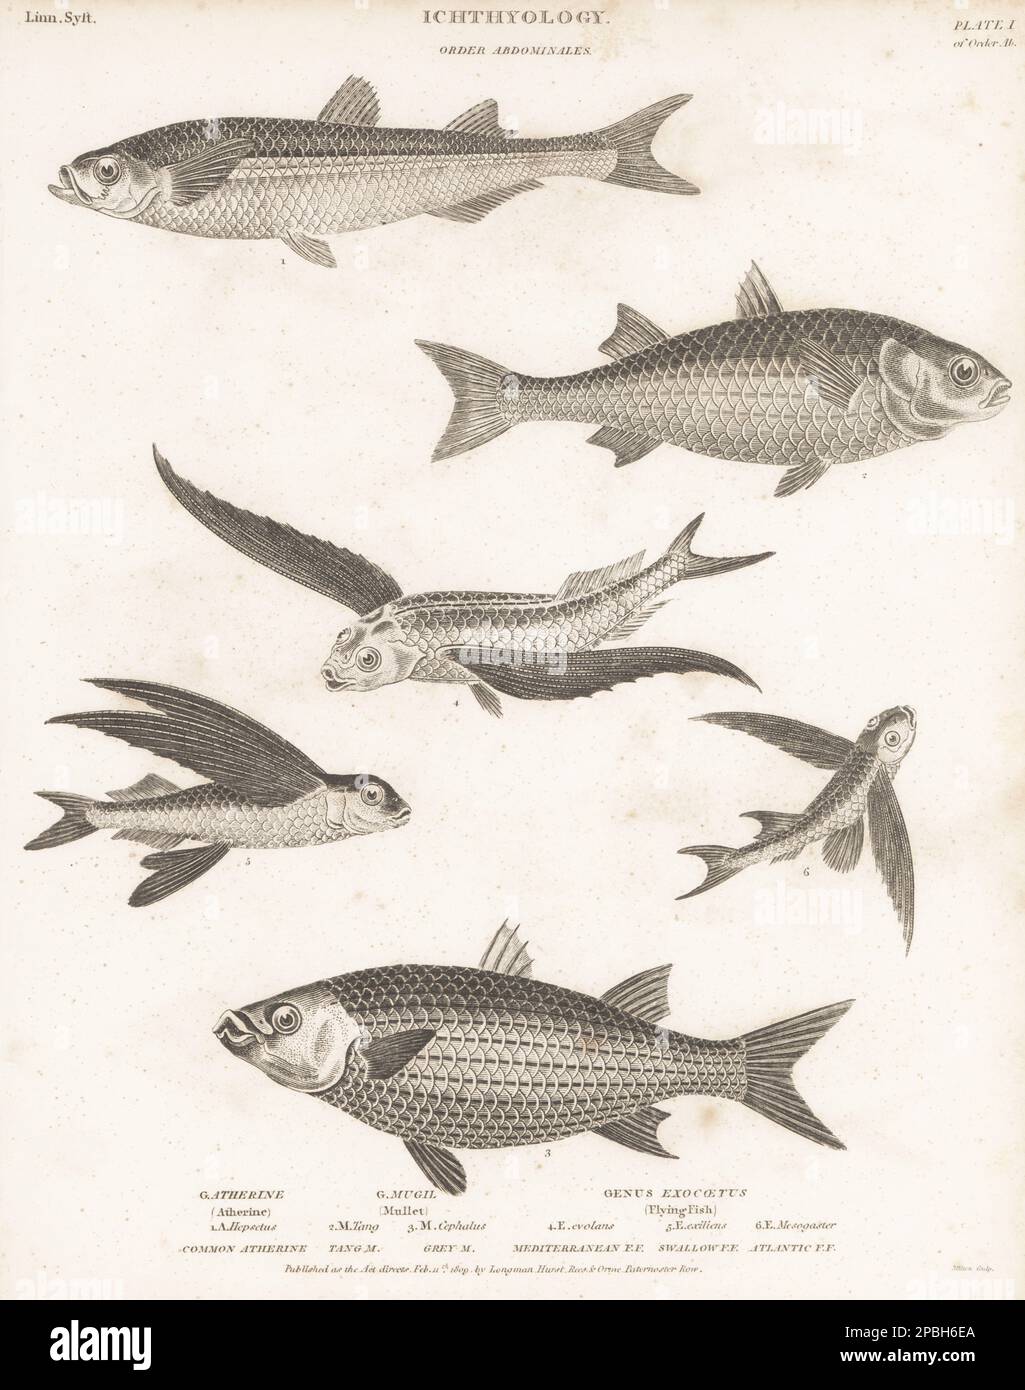 Mediterranean sand smelt, Atherina hepsetus 1, flathead grey mullet, Mugil cephalus 2,3, tropical two-wing flyingfish, Exocoetus volitans 4, flyingfish, Cheilopogon exsiliens 5, and African sailfin flying fish, Parexocoetus mento 6. Copperplate engraving by Thomas Milton from Abraham Rees' Cyclopedia or Universal Dictionary of Arts, Sciences and Literature, Longman, Hurst, Rees, Orme, Paternoster Row, London, February 11, 1809. Stock Photo